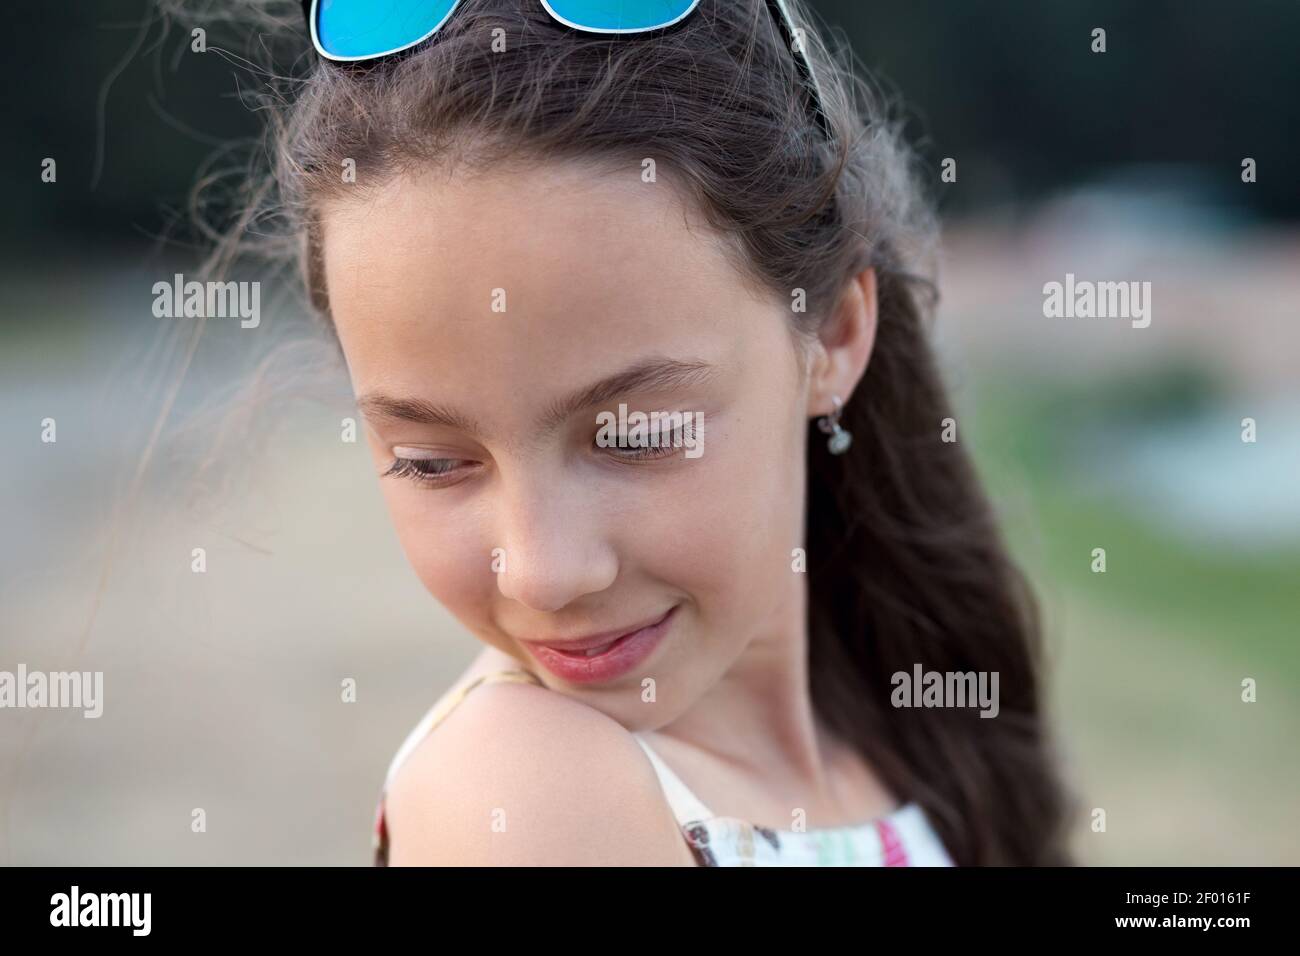 Portrait of beautiful serious teenager girl, looking down. Stock Photo